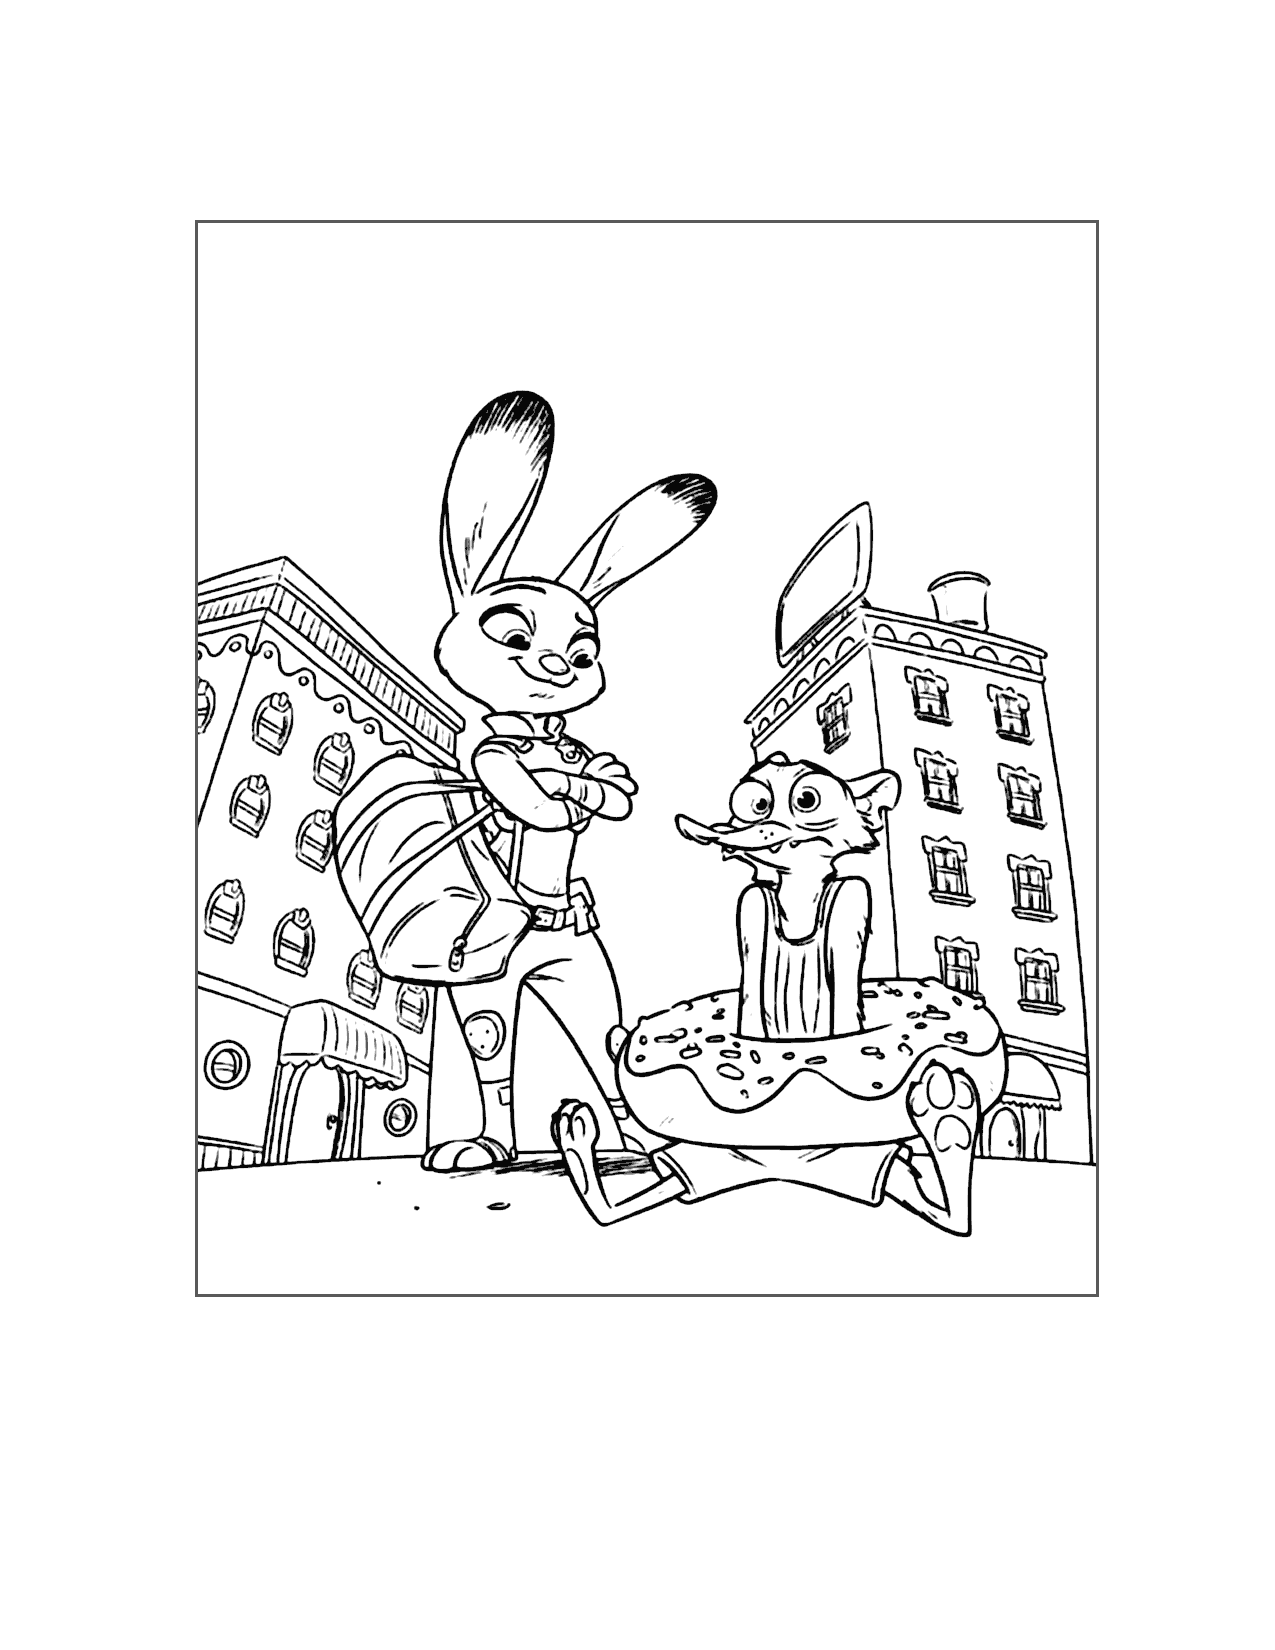 Judy Catches A Weasel Zootopia Coloring Page